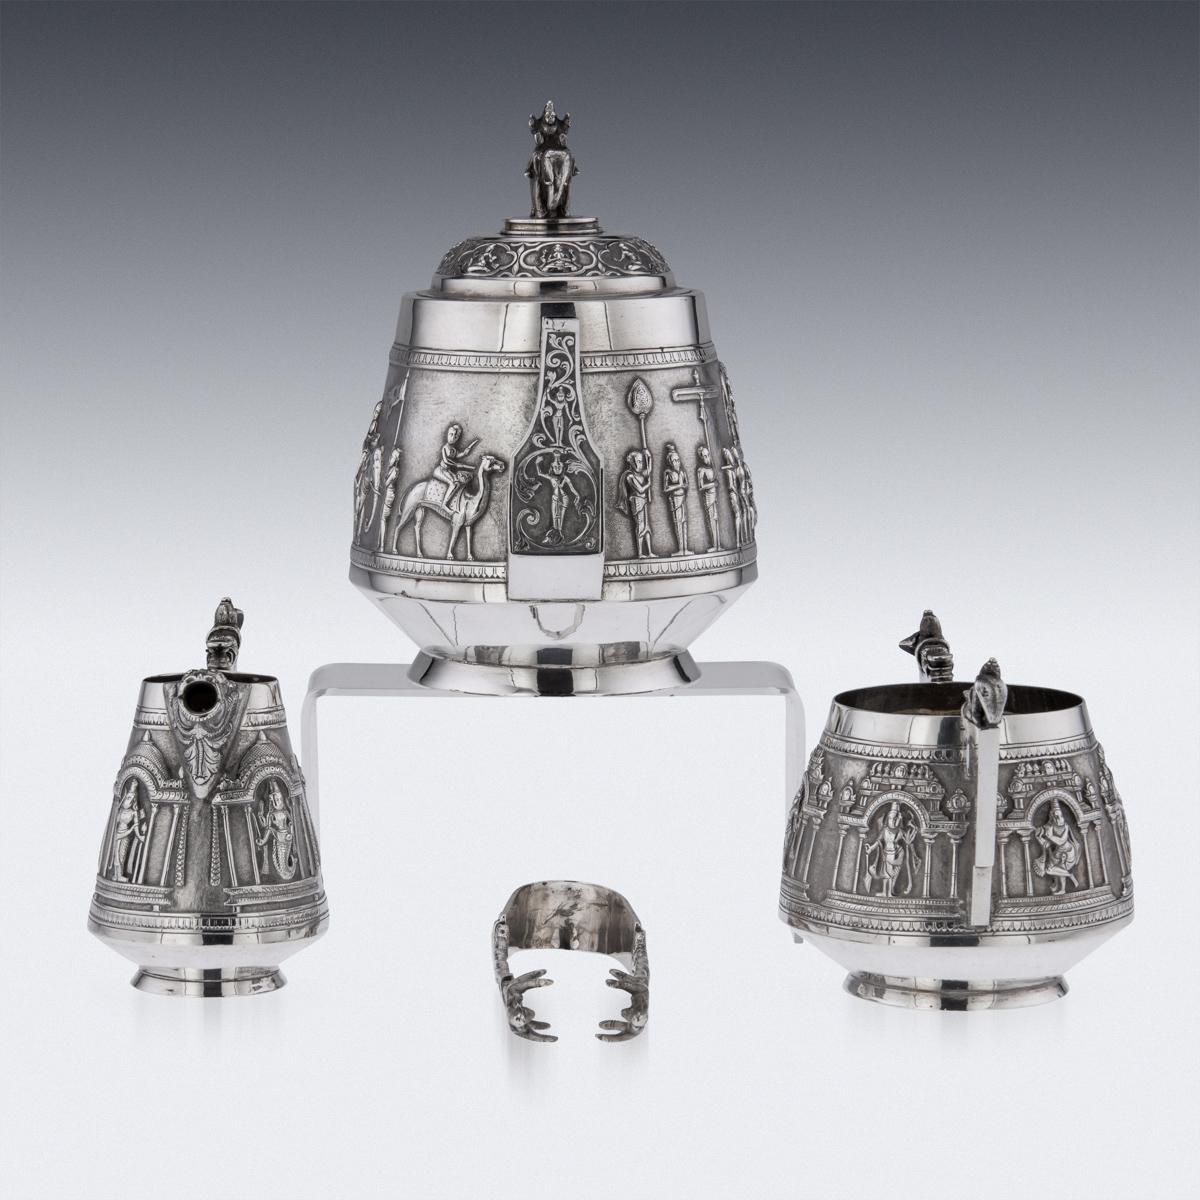 19th Century Indian Solid Silver Swami Tea Set, P. Orr & Sons, Madras, c.1880 1